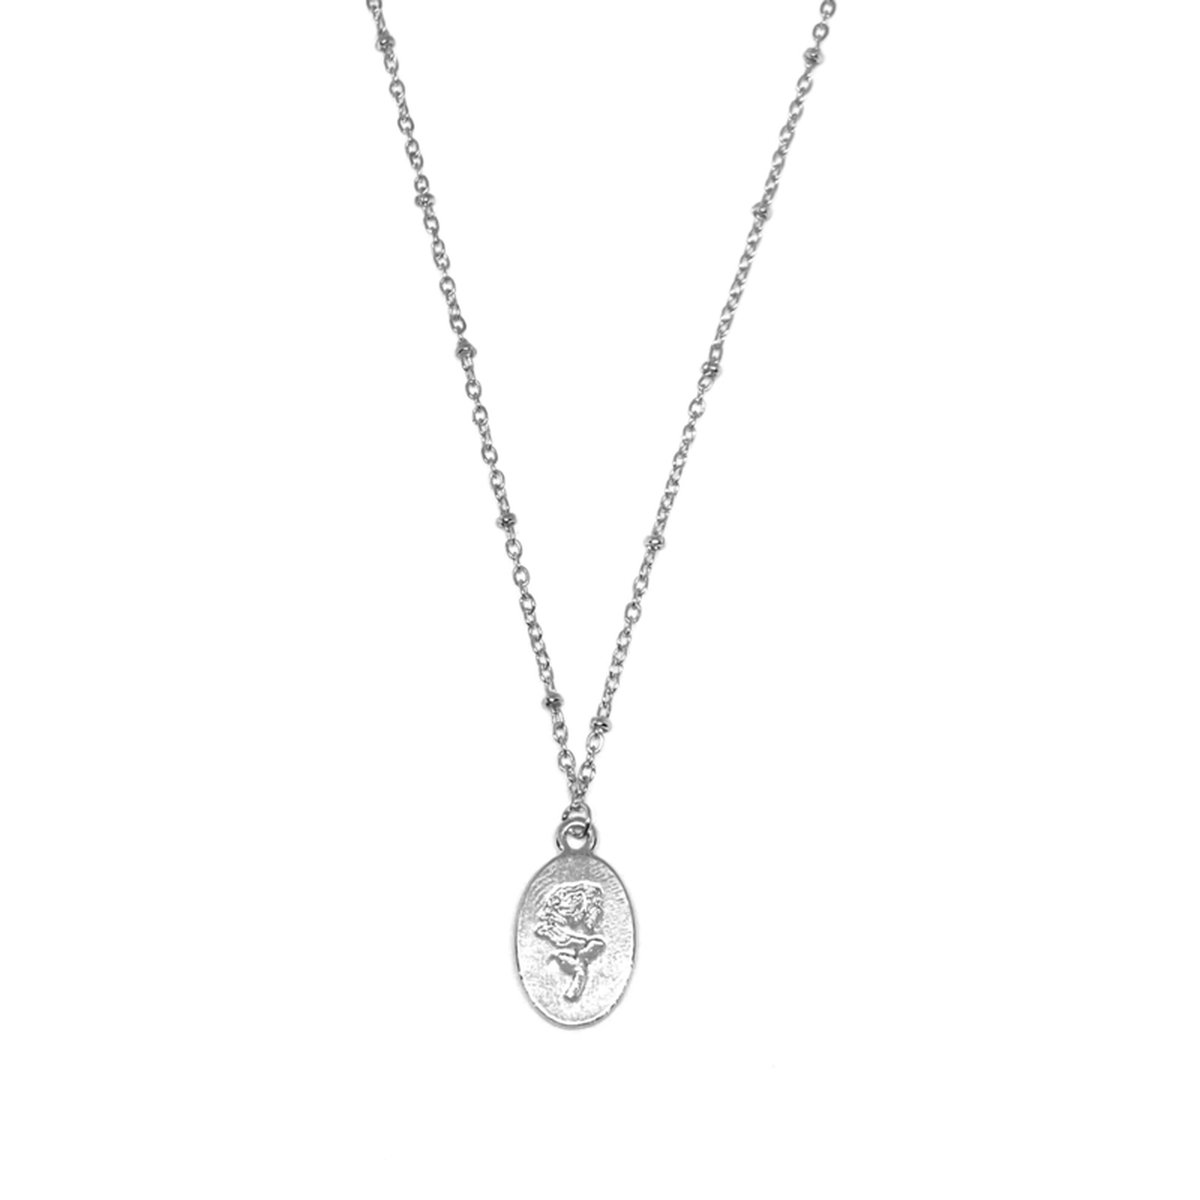 The rose necklace - silver